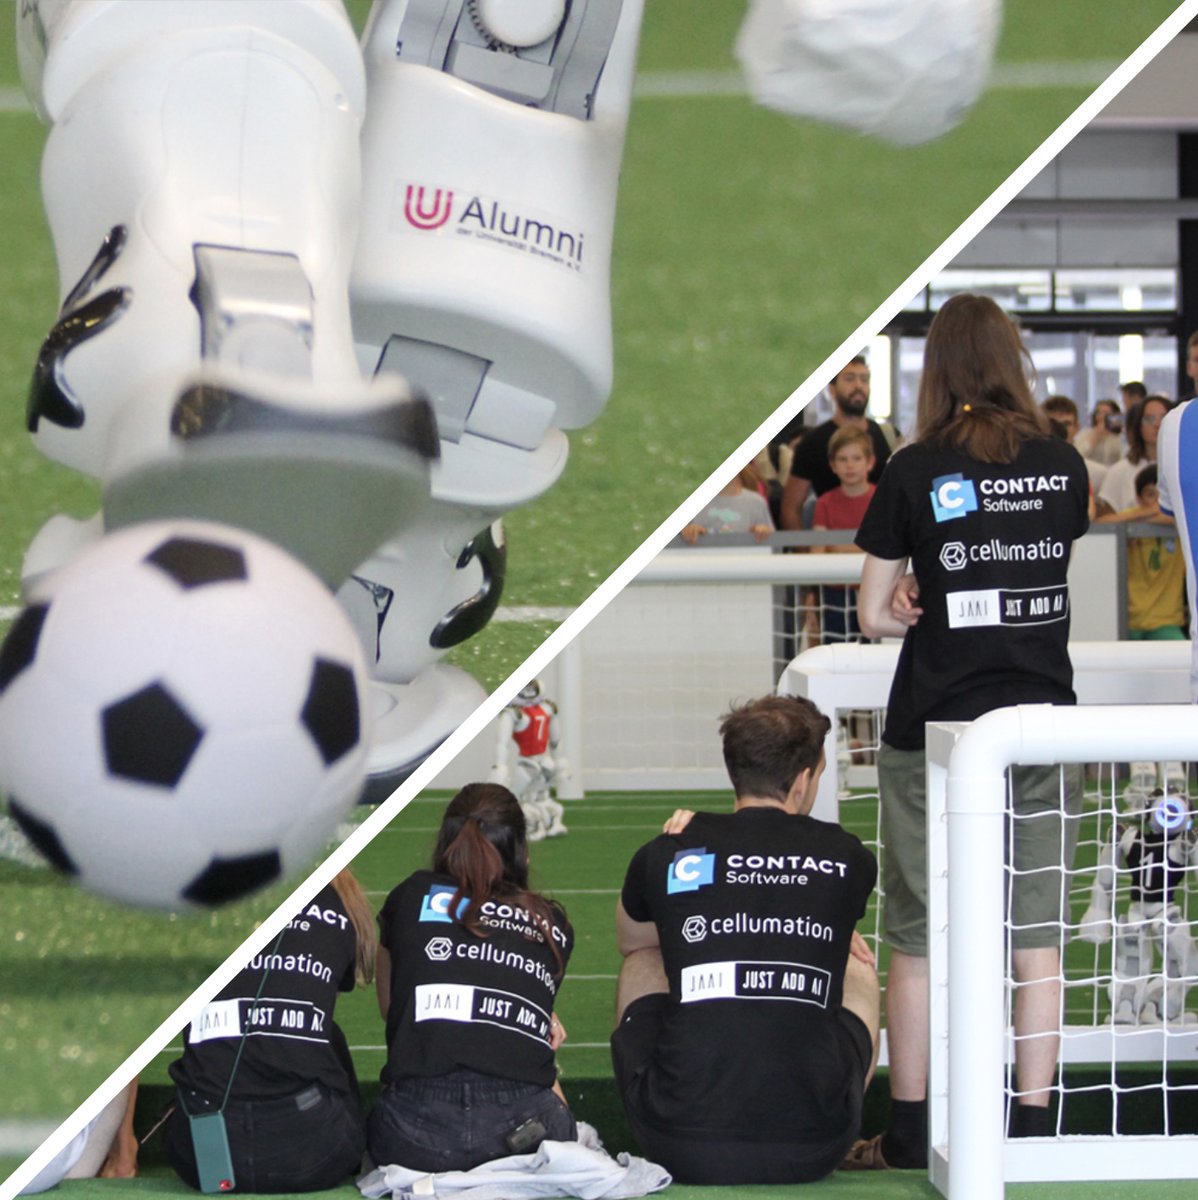 And finally a huuuuge THANK YOU to our great sponsors @CONTACTSoftware , cellumation, @JUST_ADD_AI , and Alumni der Universität Bremen e.V.! Without your enthusiastic support, it would not have been possible to come to RoboCup with so many students and robots! #robocup #robots